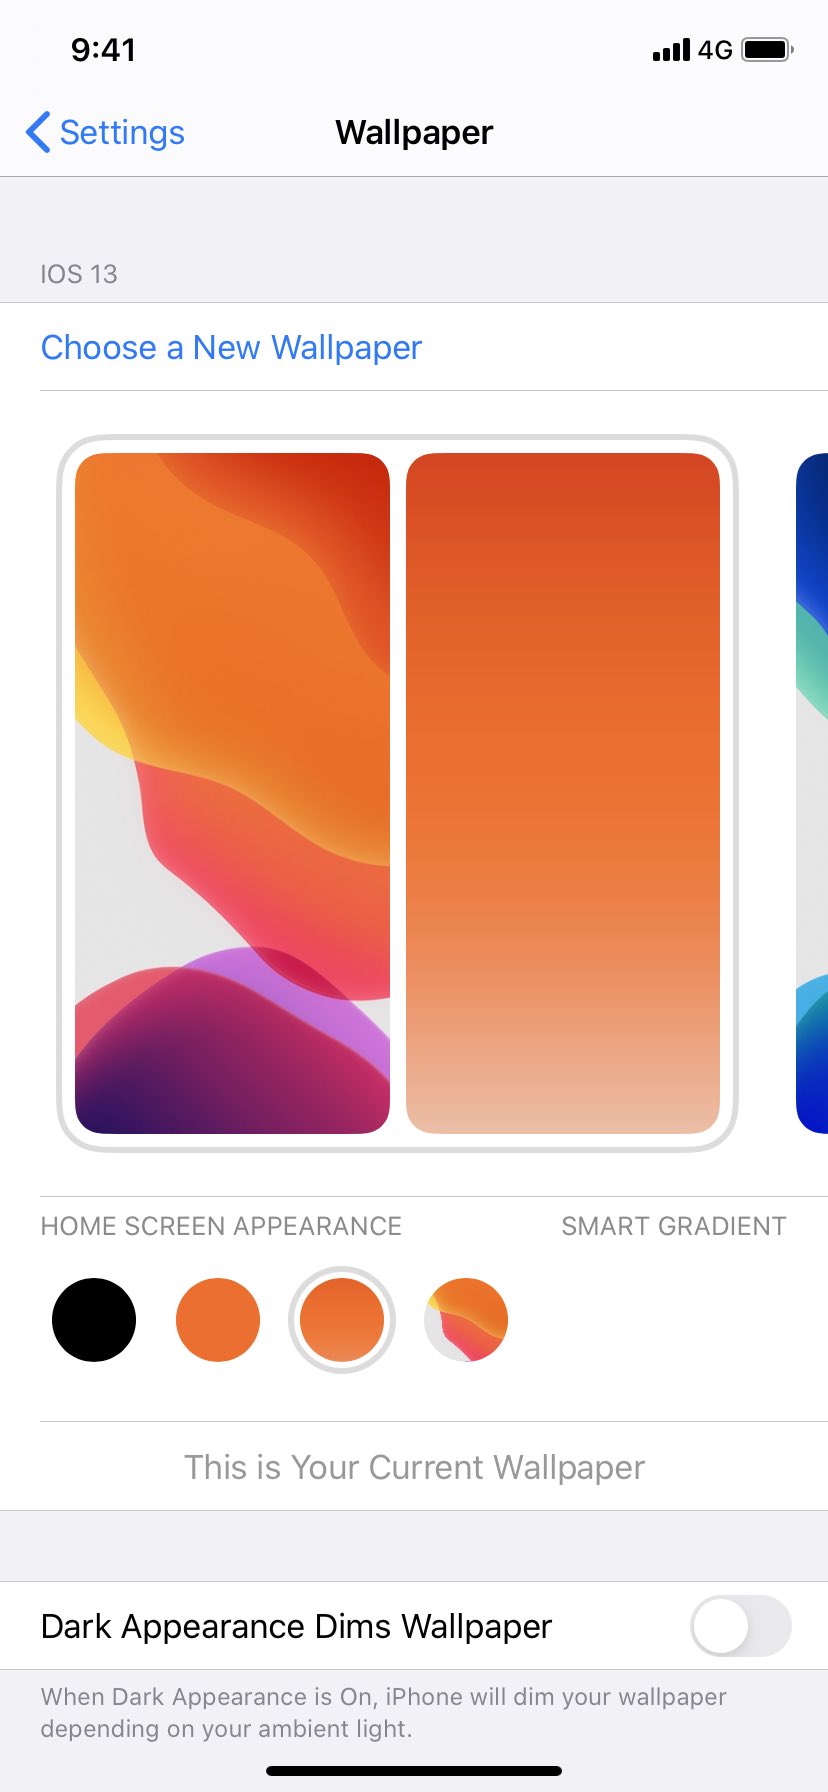 New Wallpaper Settings Panel and Evidence of Home Screen Widgets Found in iOS 14 Build [Images]